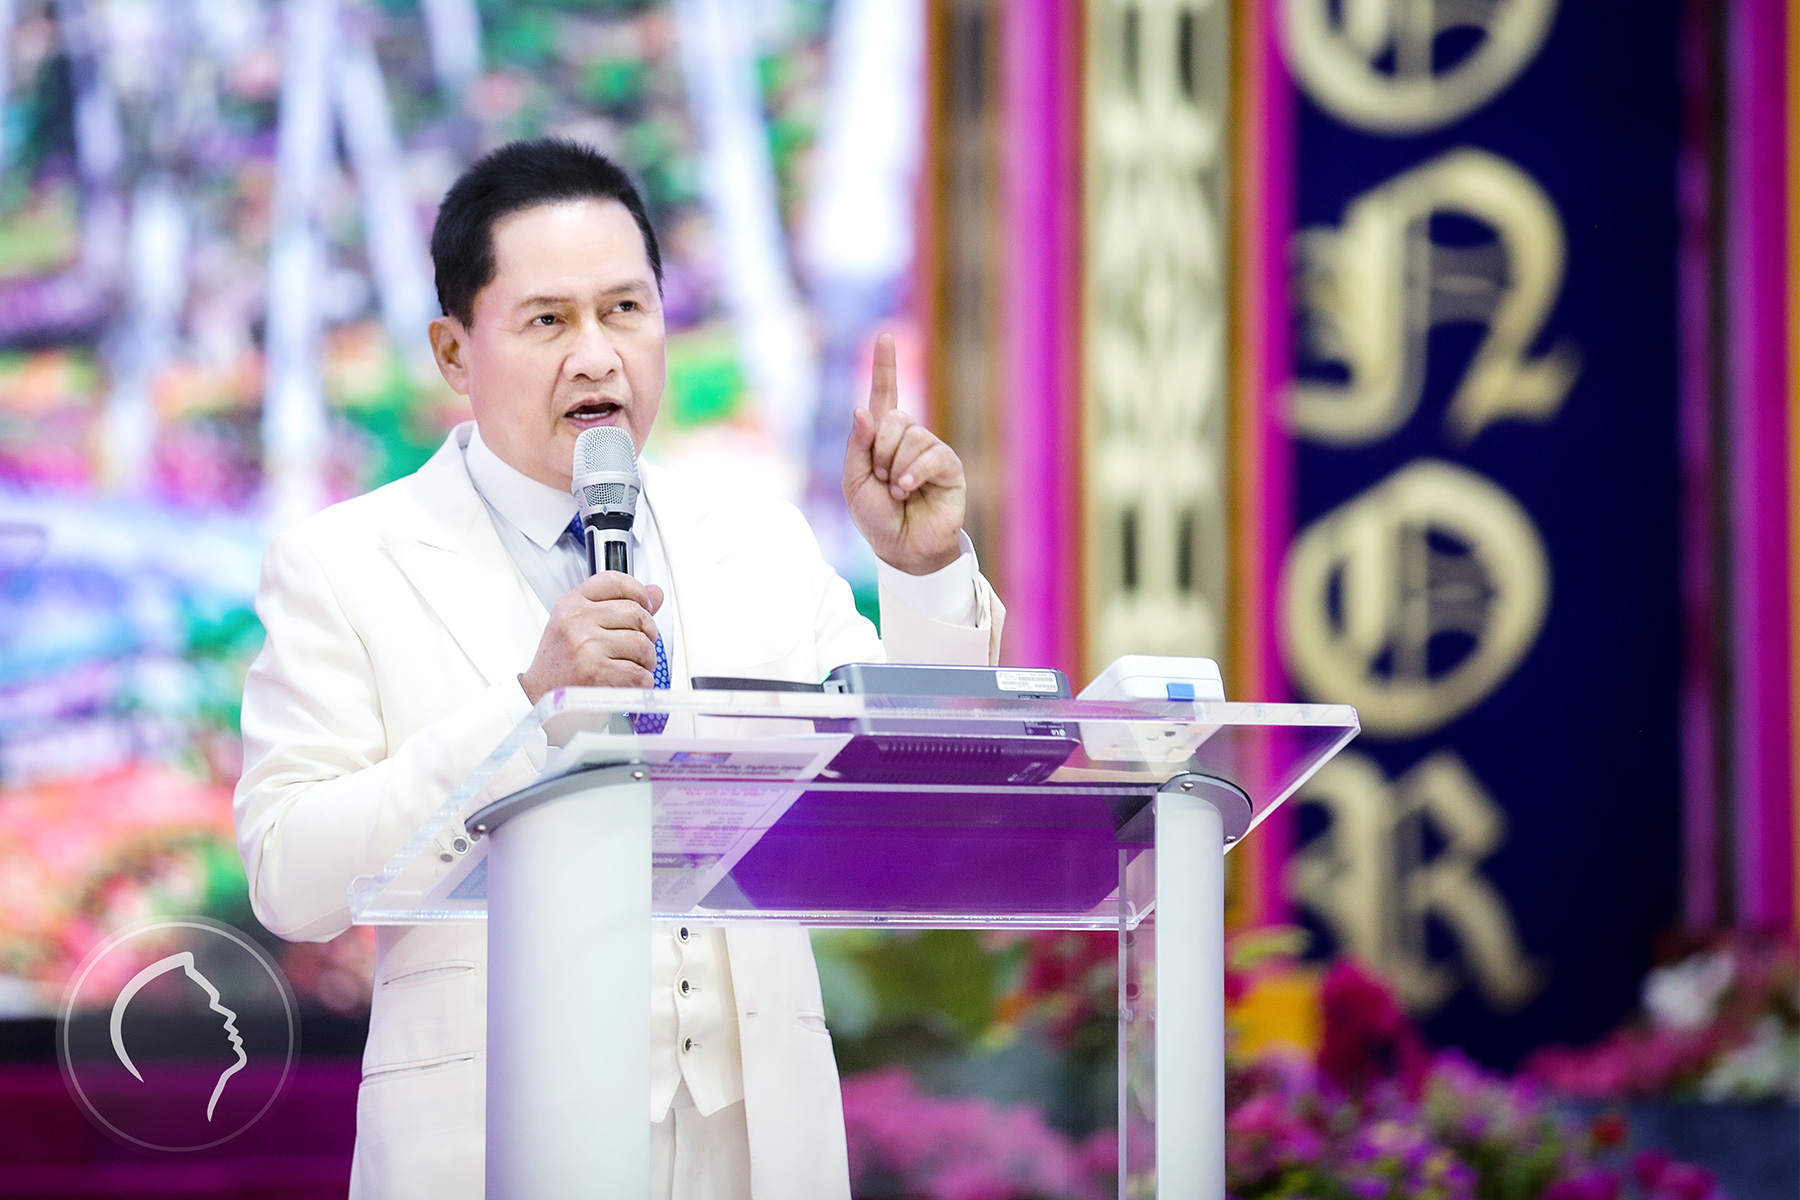 14 Quiboloy guns sold to 3 persons surnamed ‘Canada’ – PNP